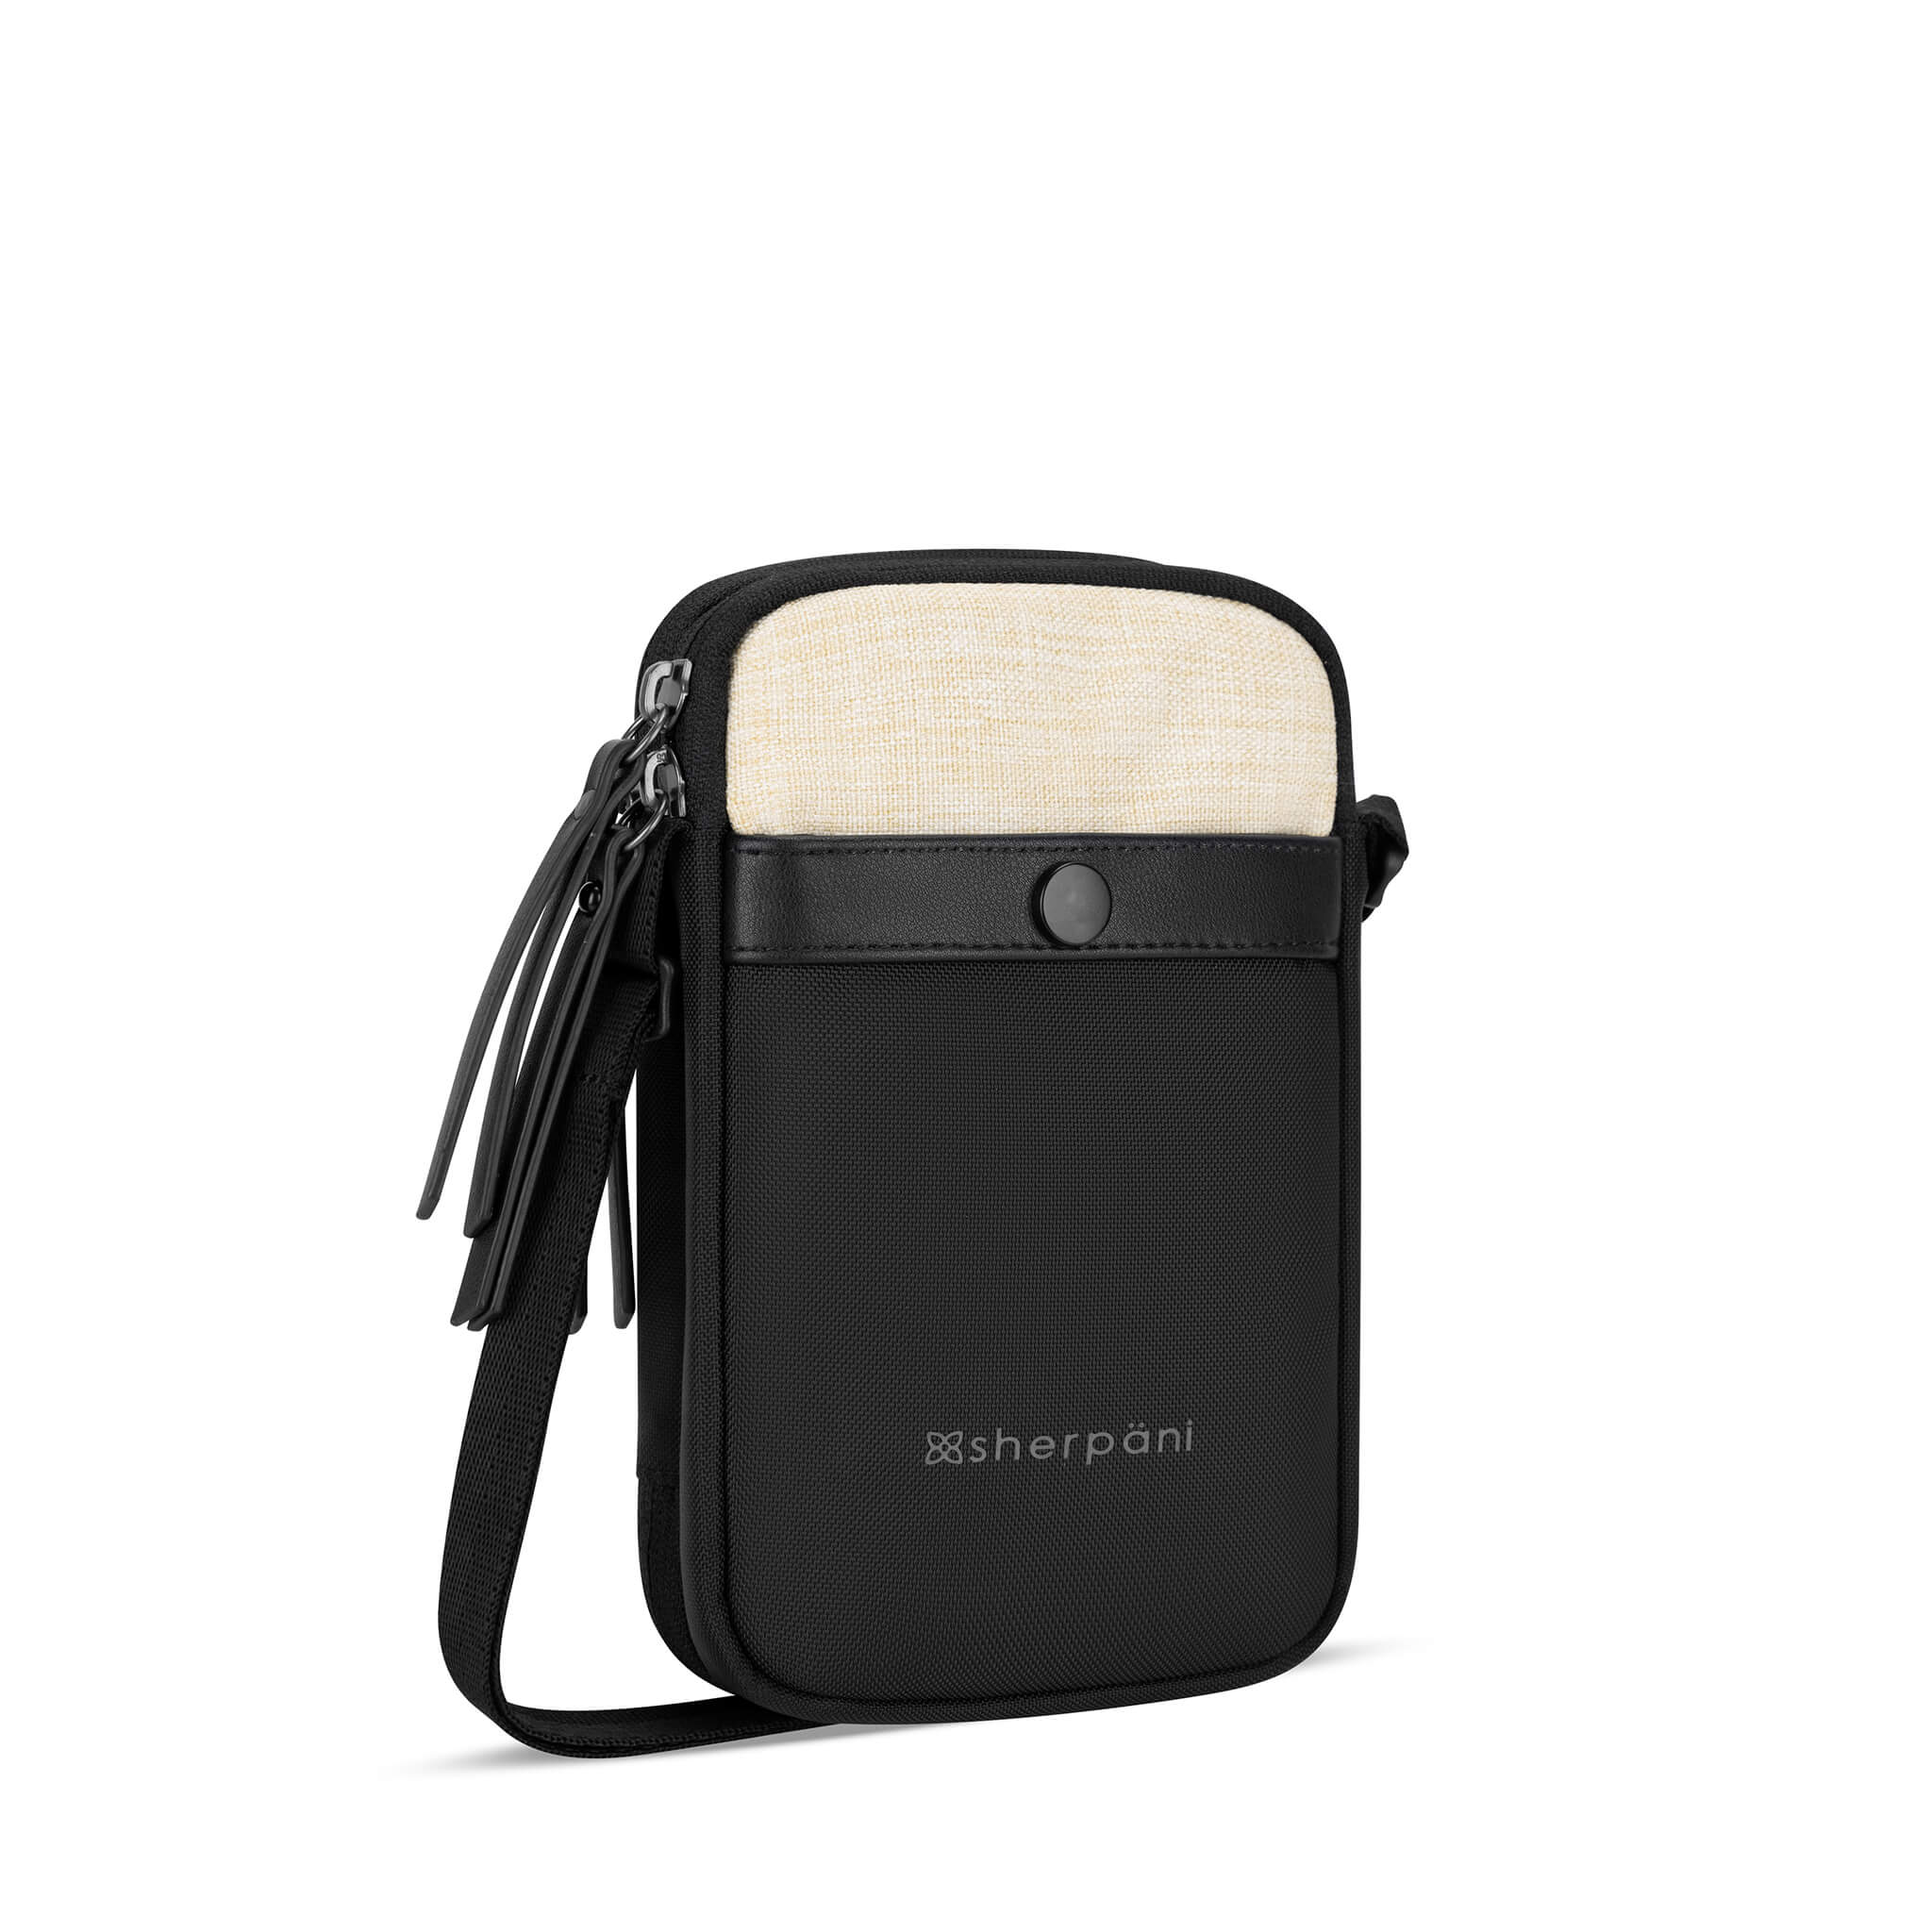 Angled front view of Sherpani crossbody wallet, the Simplicity in Straw. The simple and minimalist bag includes anti-theft features and an adjustable crossbody strap. 